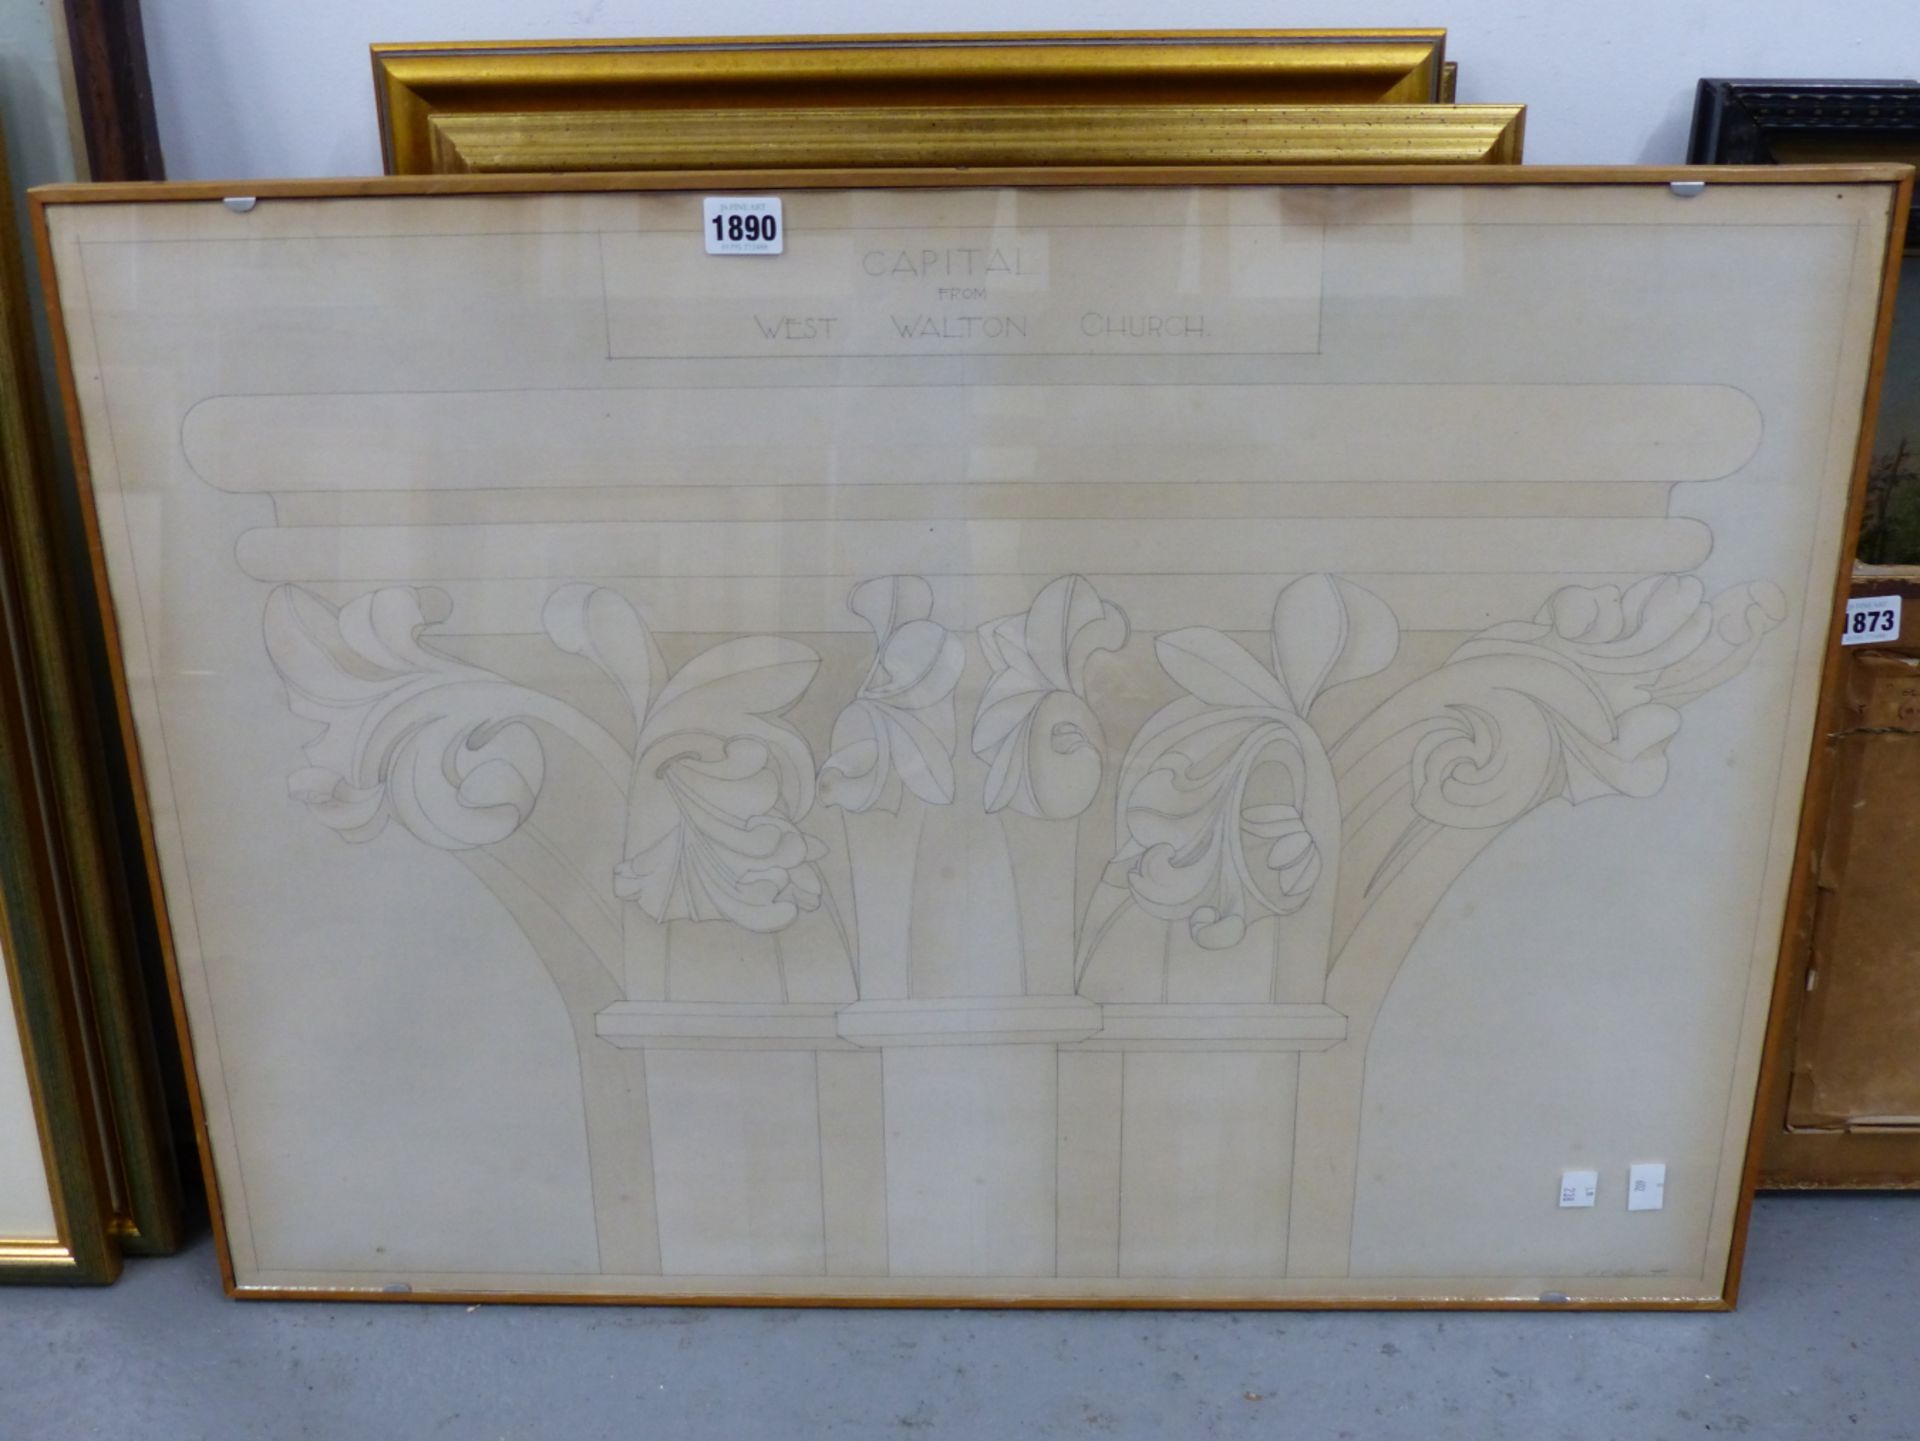 R.R. BLUNT (EARLY 20TH CENTURY), CAPITAL FROM WEST WALTON CHURCH, ARCHITECTURAL STUDY, SIGNED, - Image 2 of 4